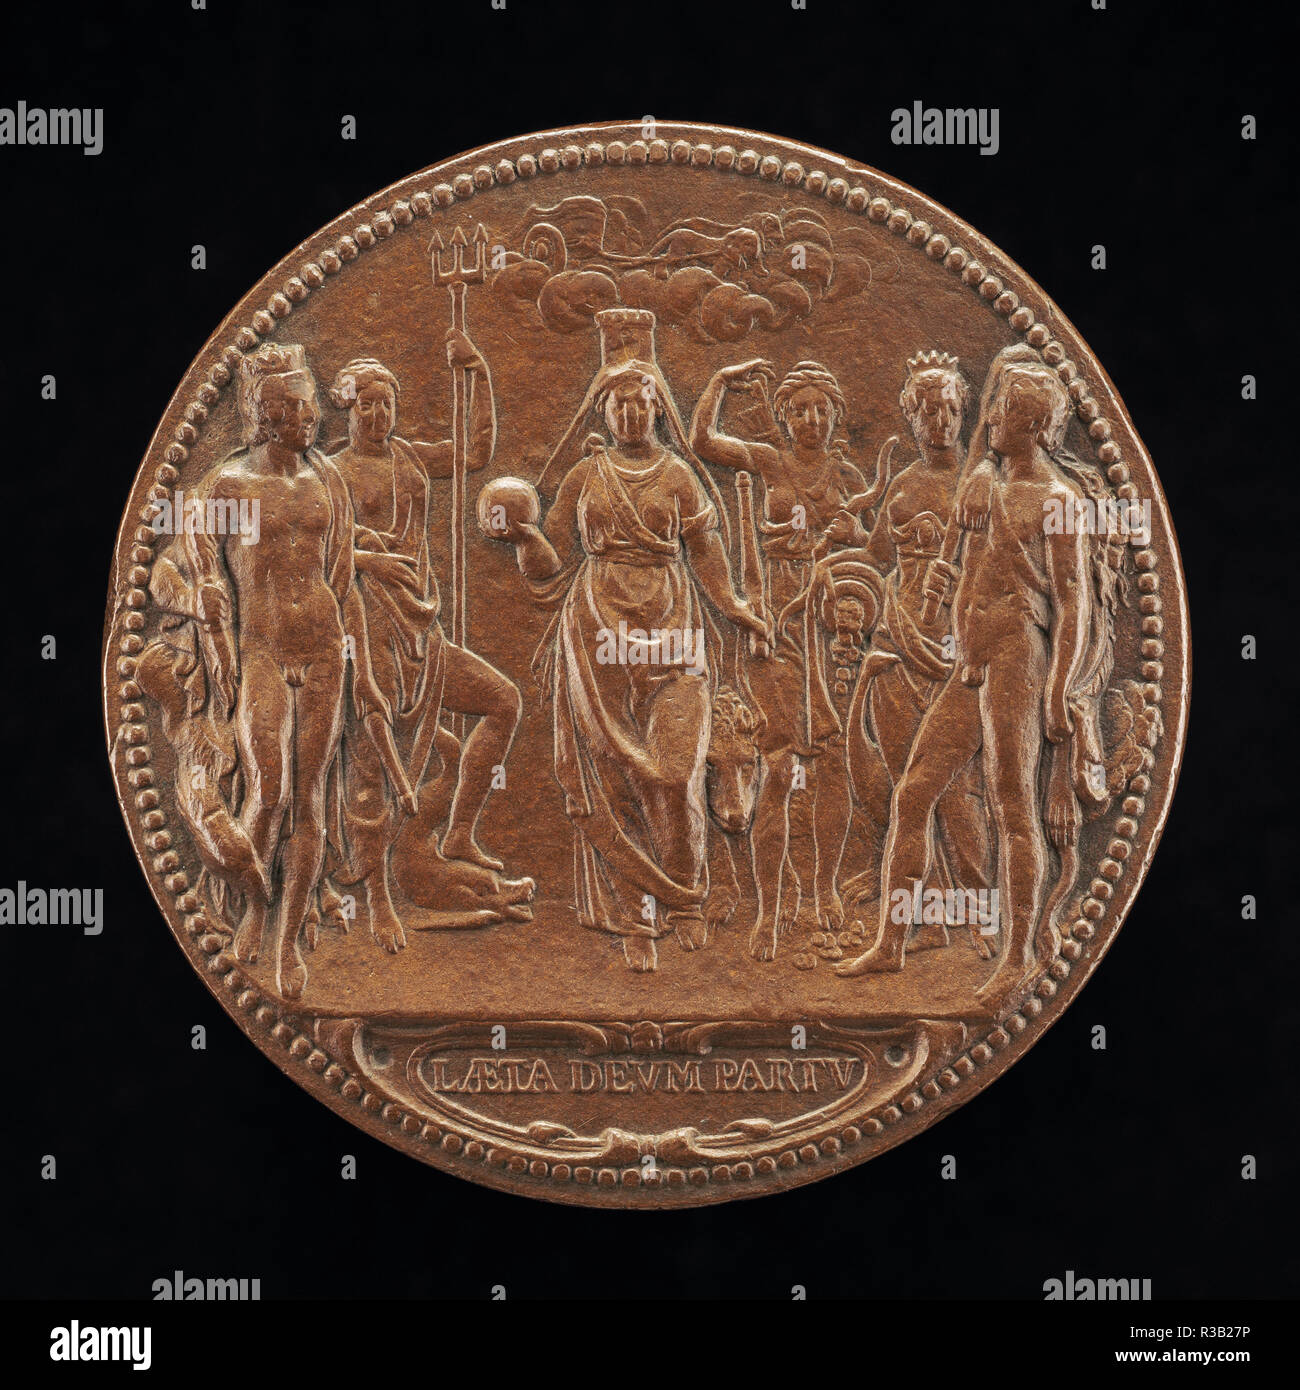 The Queen as Mother of the Gods [reverse]. Dated: 1624. Dimensions: overall (diameter): 5.41 cm (2 1/8 in.)  gross weight: 65.64 gr (0.145 lb.)  axis: 12:00. Medium: bronze. Museum: National Gallery of Art, Washington DC. Author: Guillaume Dupré. Stock Photo